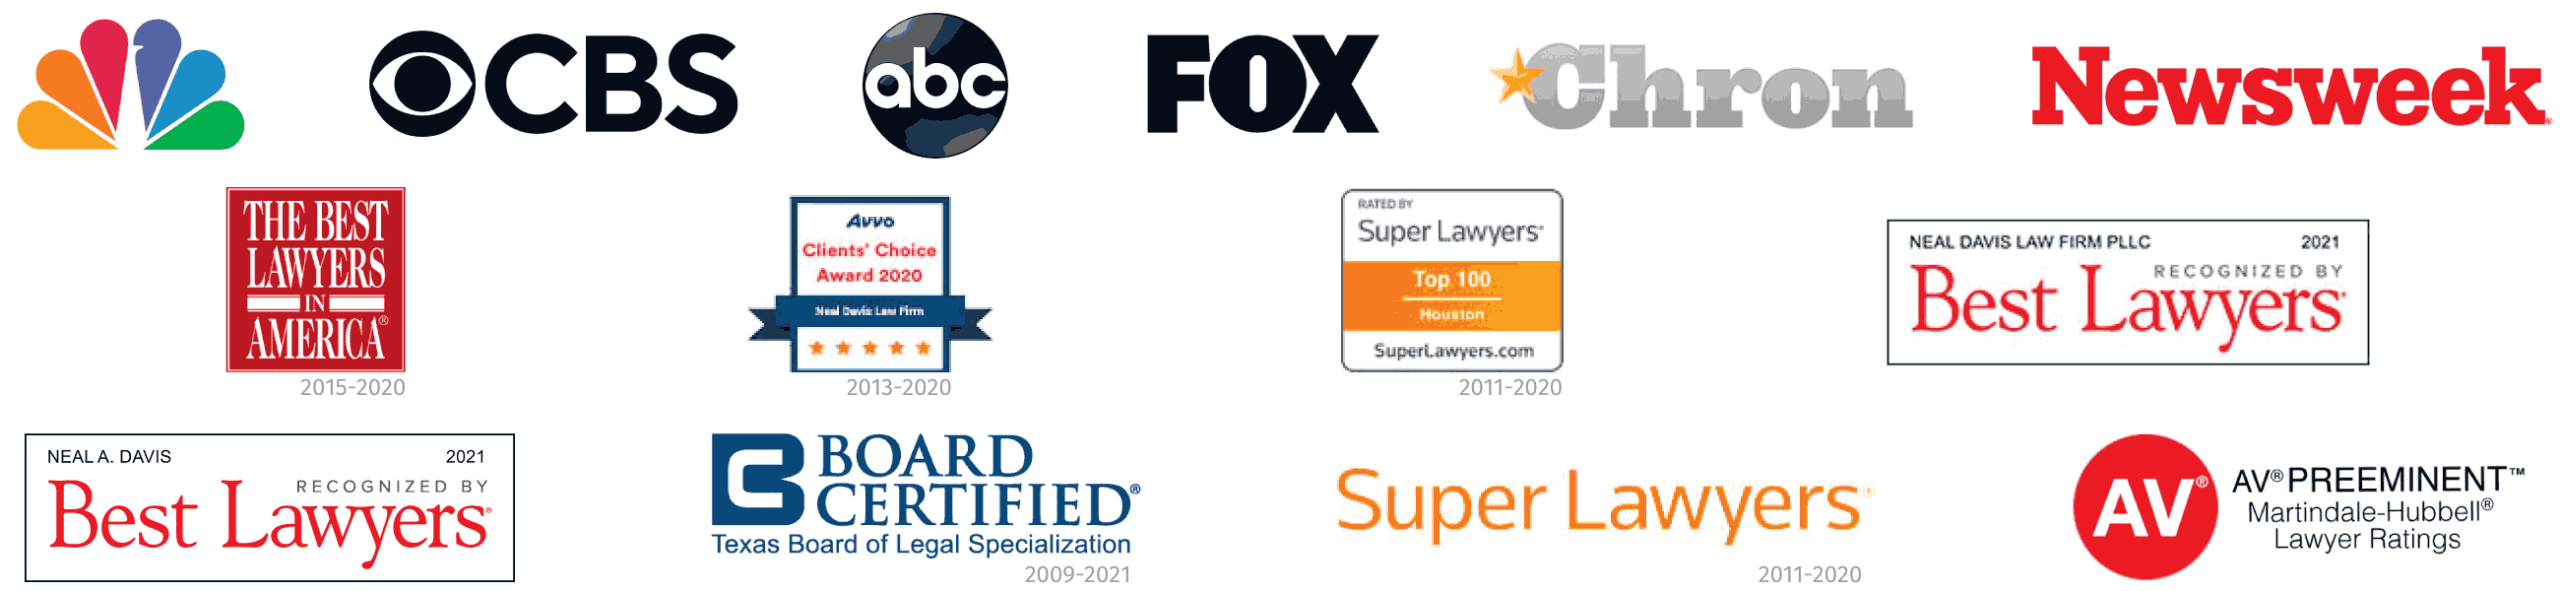 Board Certified, Criminal Law – Texas Board of Legal Specialization (2009-2021), AV Rated by Martindale Hubbell (2015), and listed as a Best Lawyer in America (2015-2022)